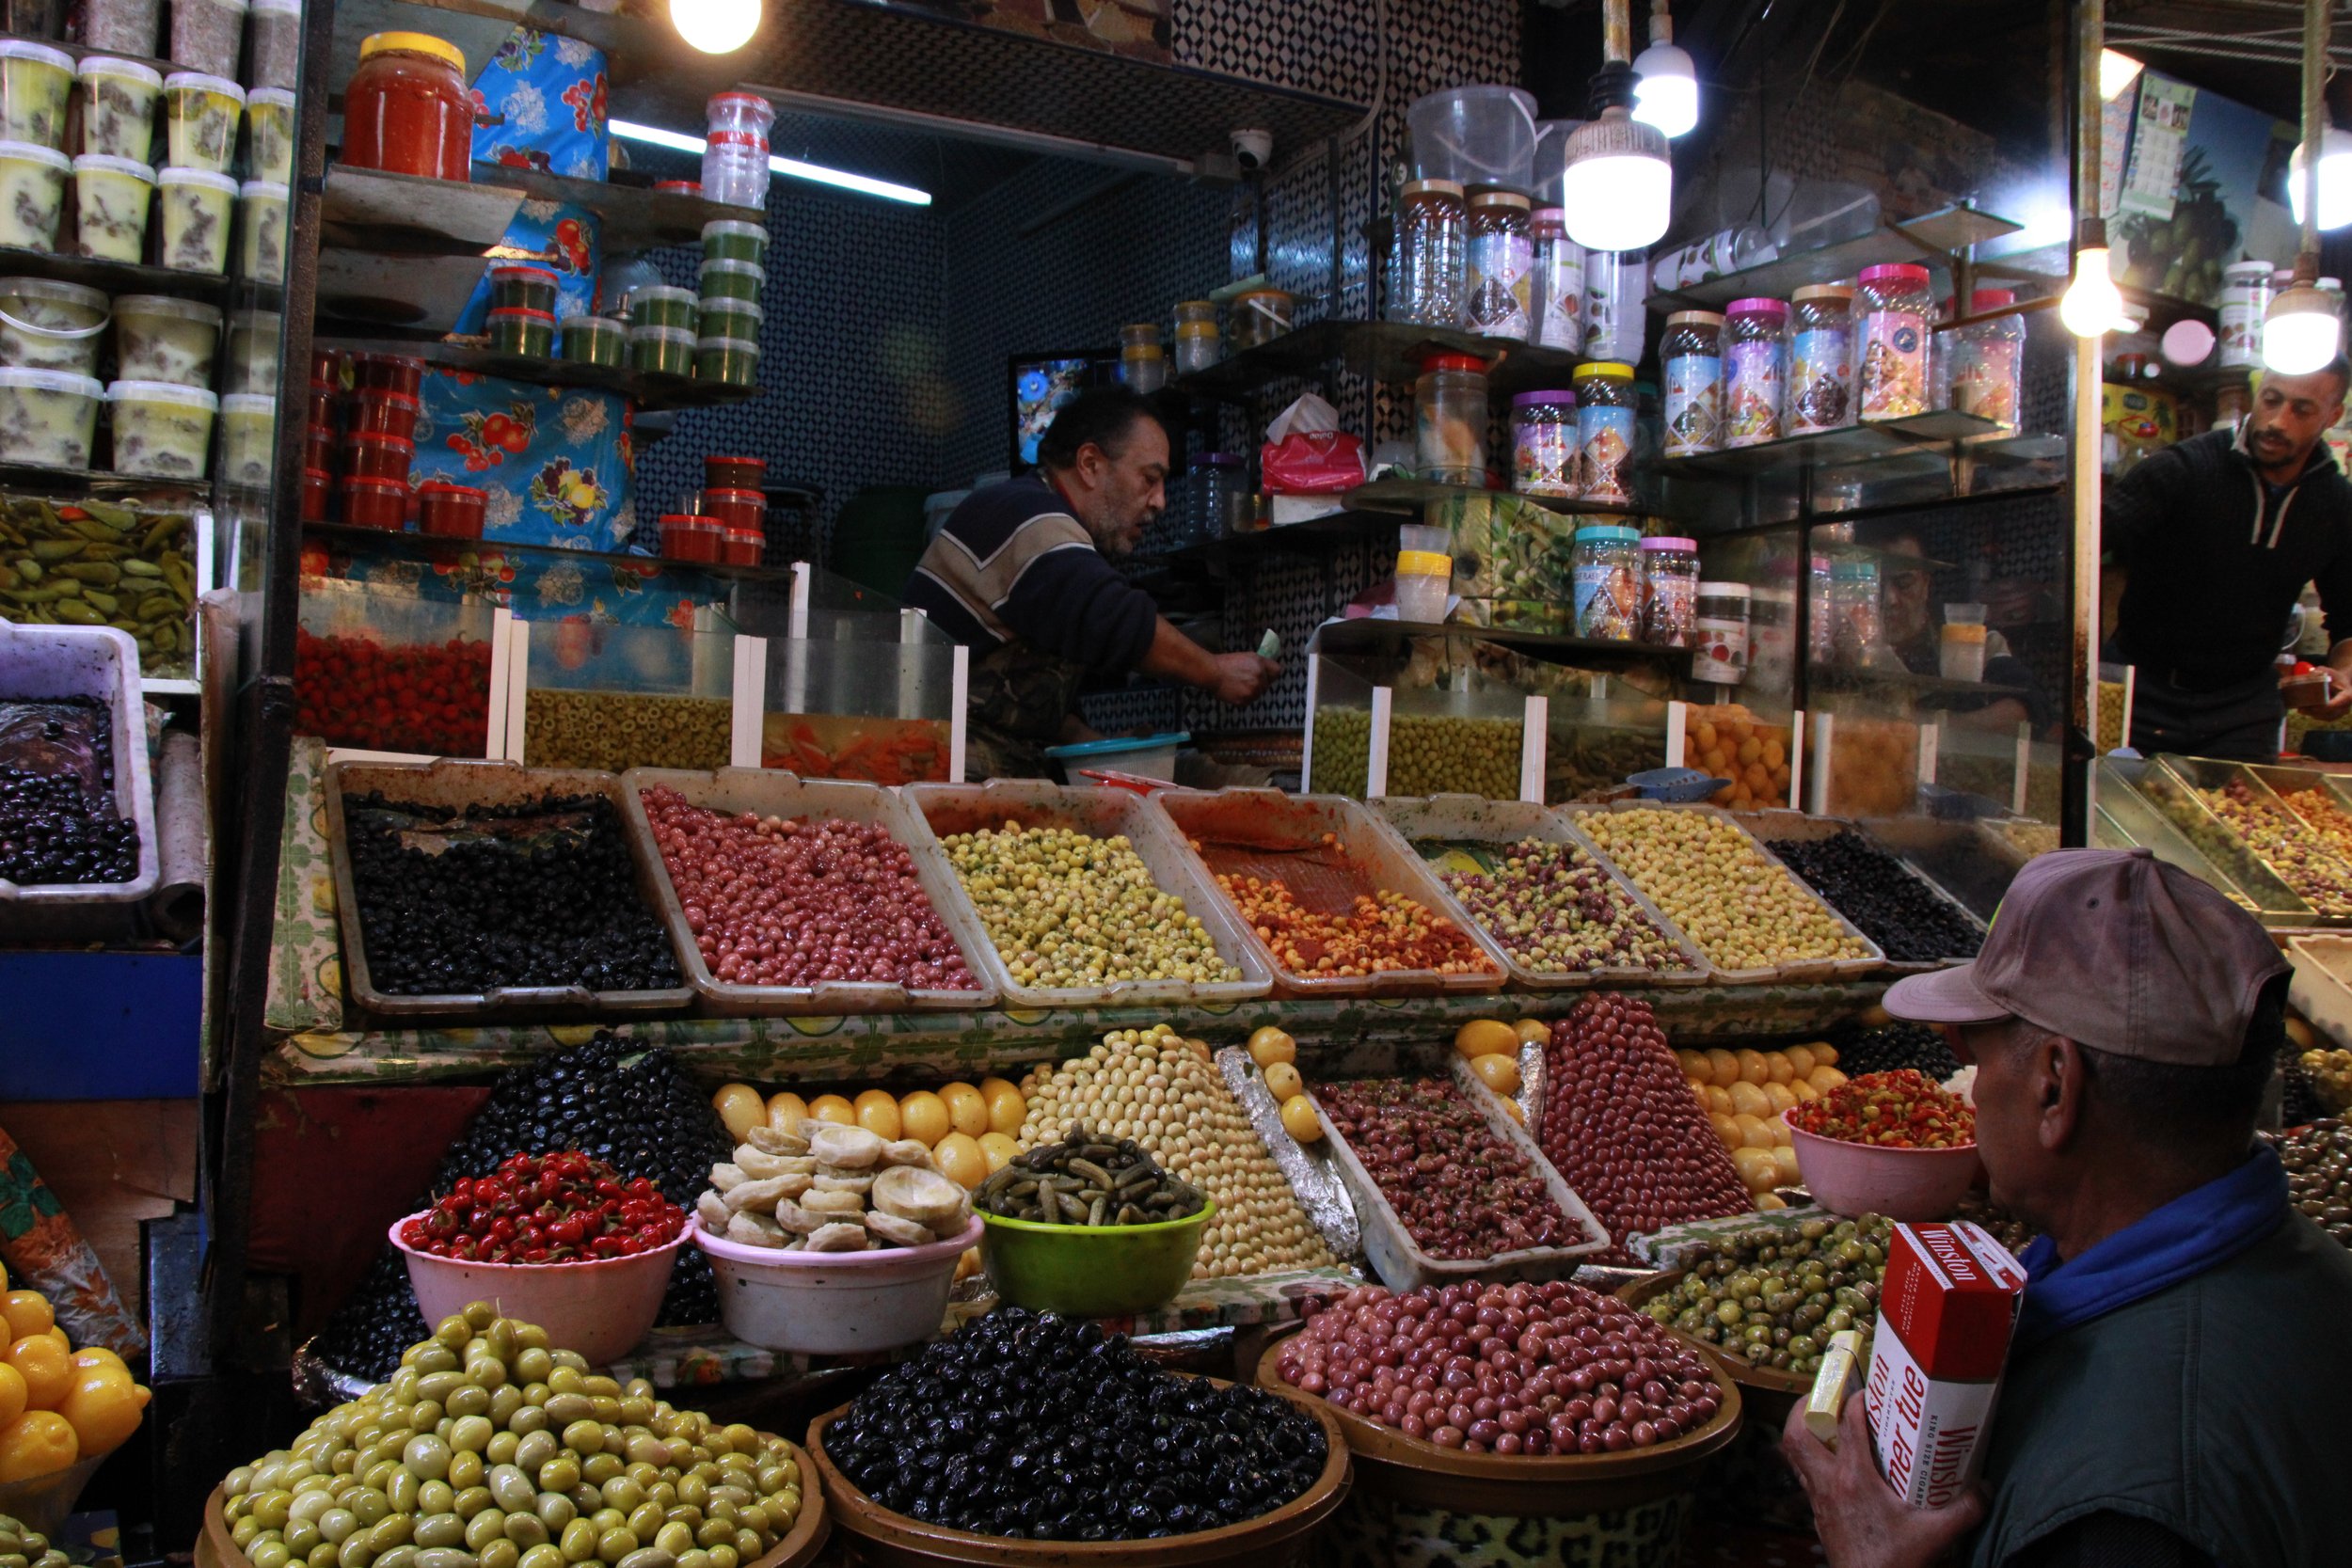  PICTURED: A vendor in the fruits, nuts, and spice souk, fulfills an order amid the sour smell of vinegar and olives, the smells of spices, and of freshly baked sweeties. PC: Andrew Corbley © 